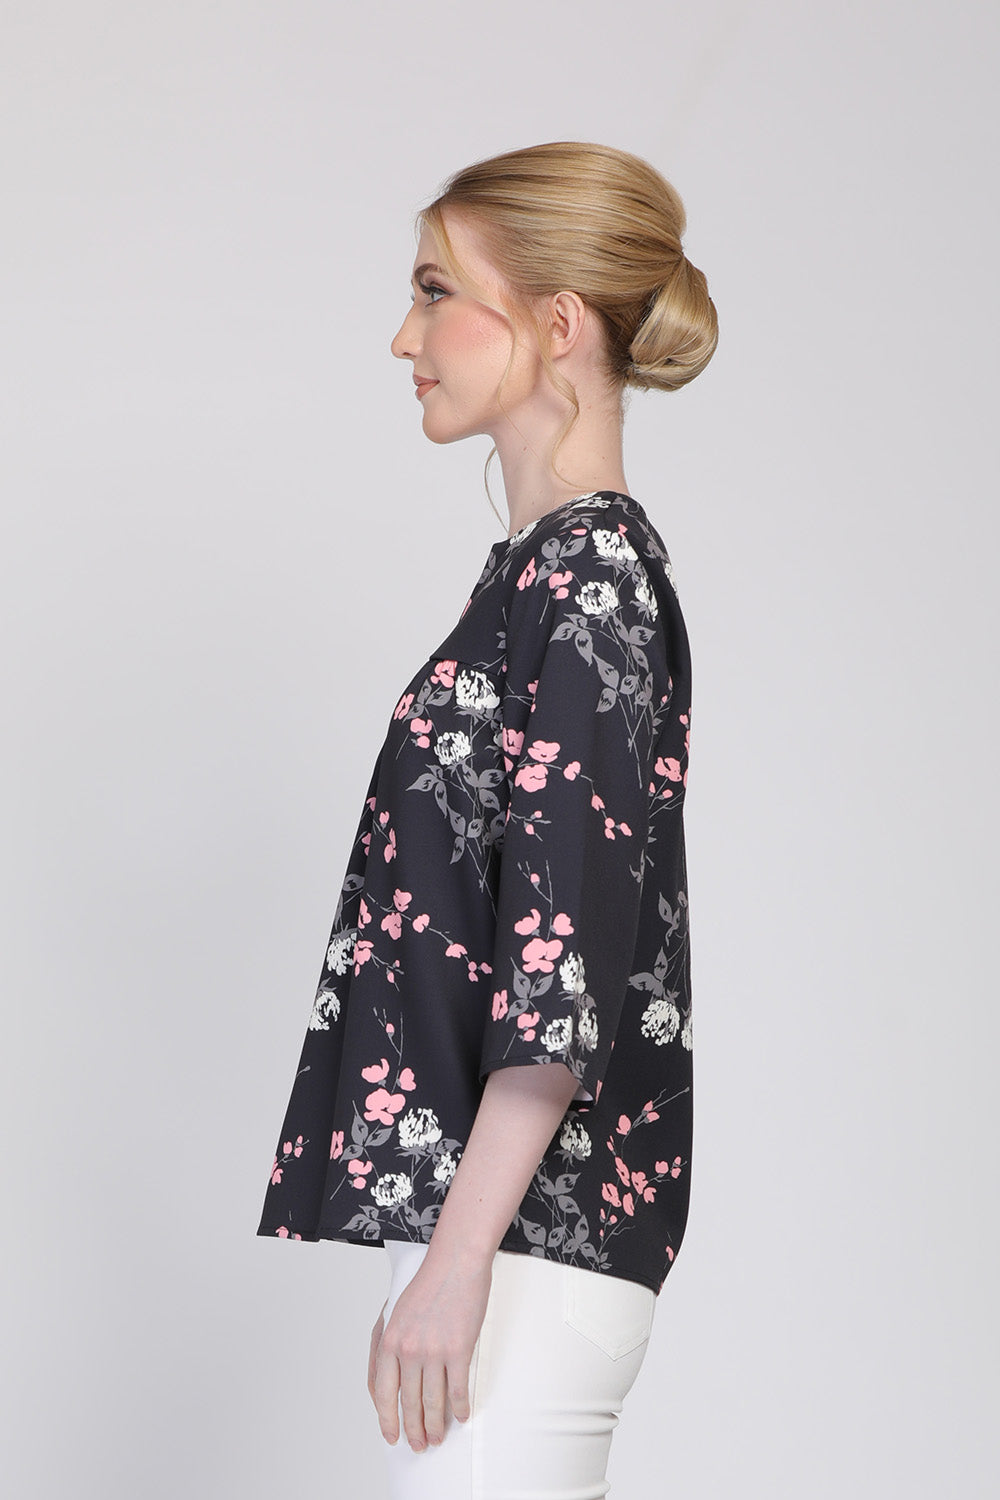 Courtney Floral Print Blouse in Black